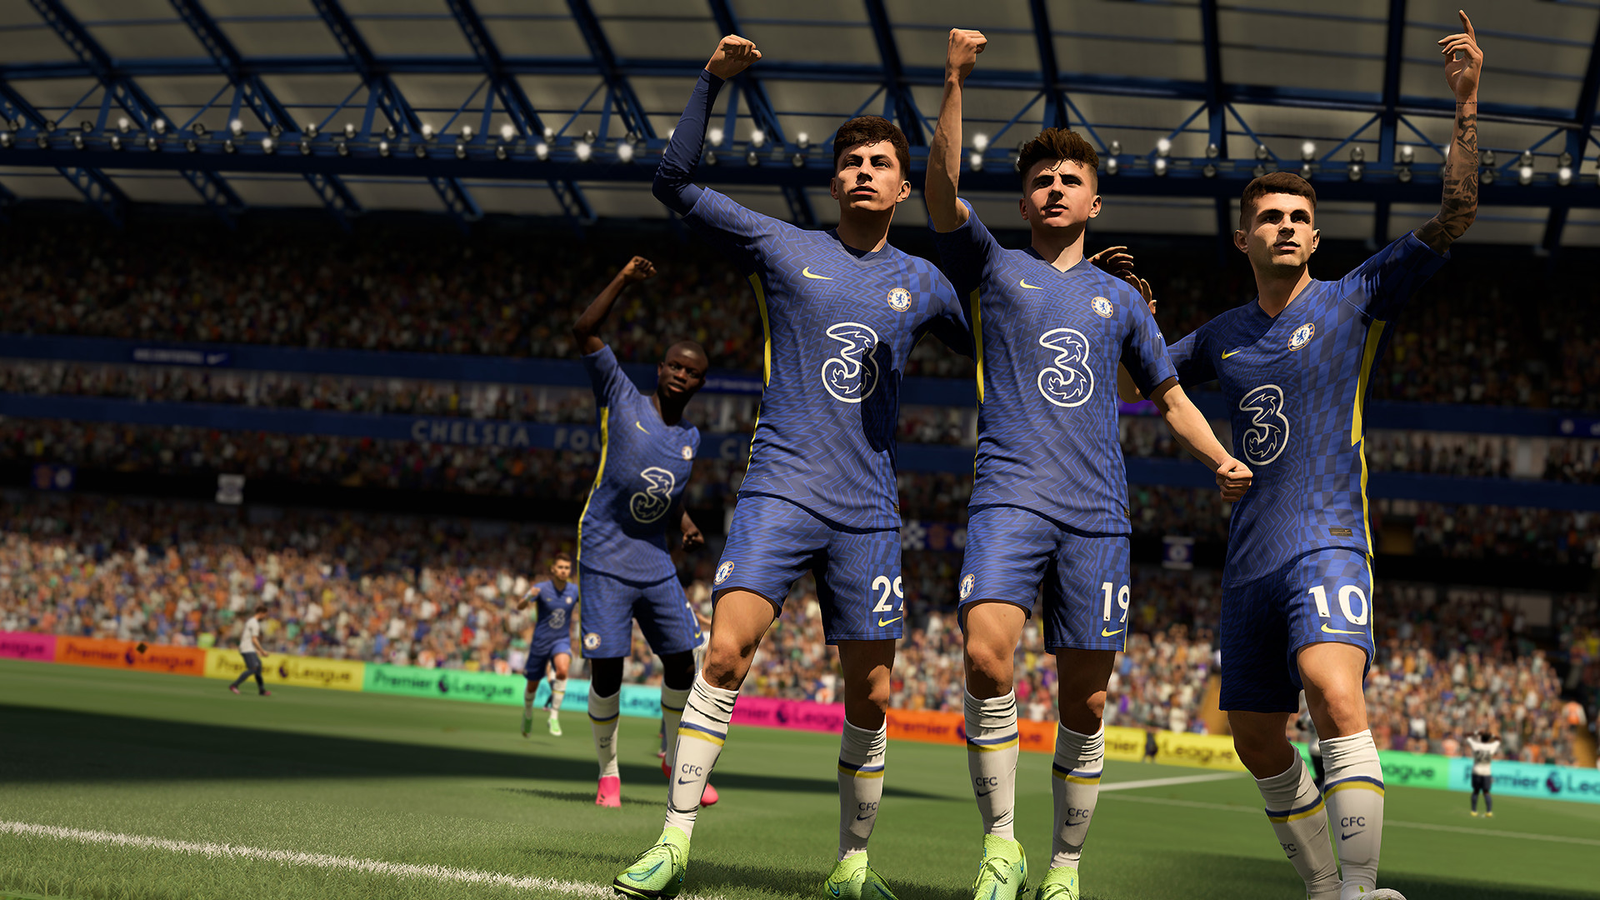 How to Enable Cross Play in EAFC 24 & Invite your PS4/PS5/XBOX/PC/SWITCH  Friends 